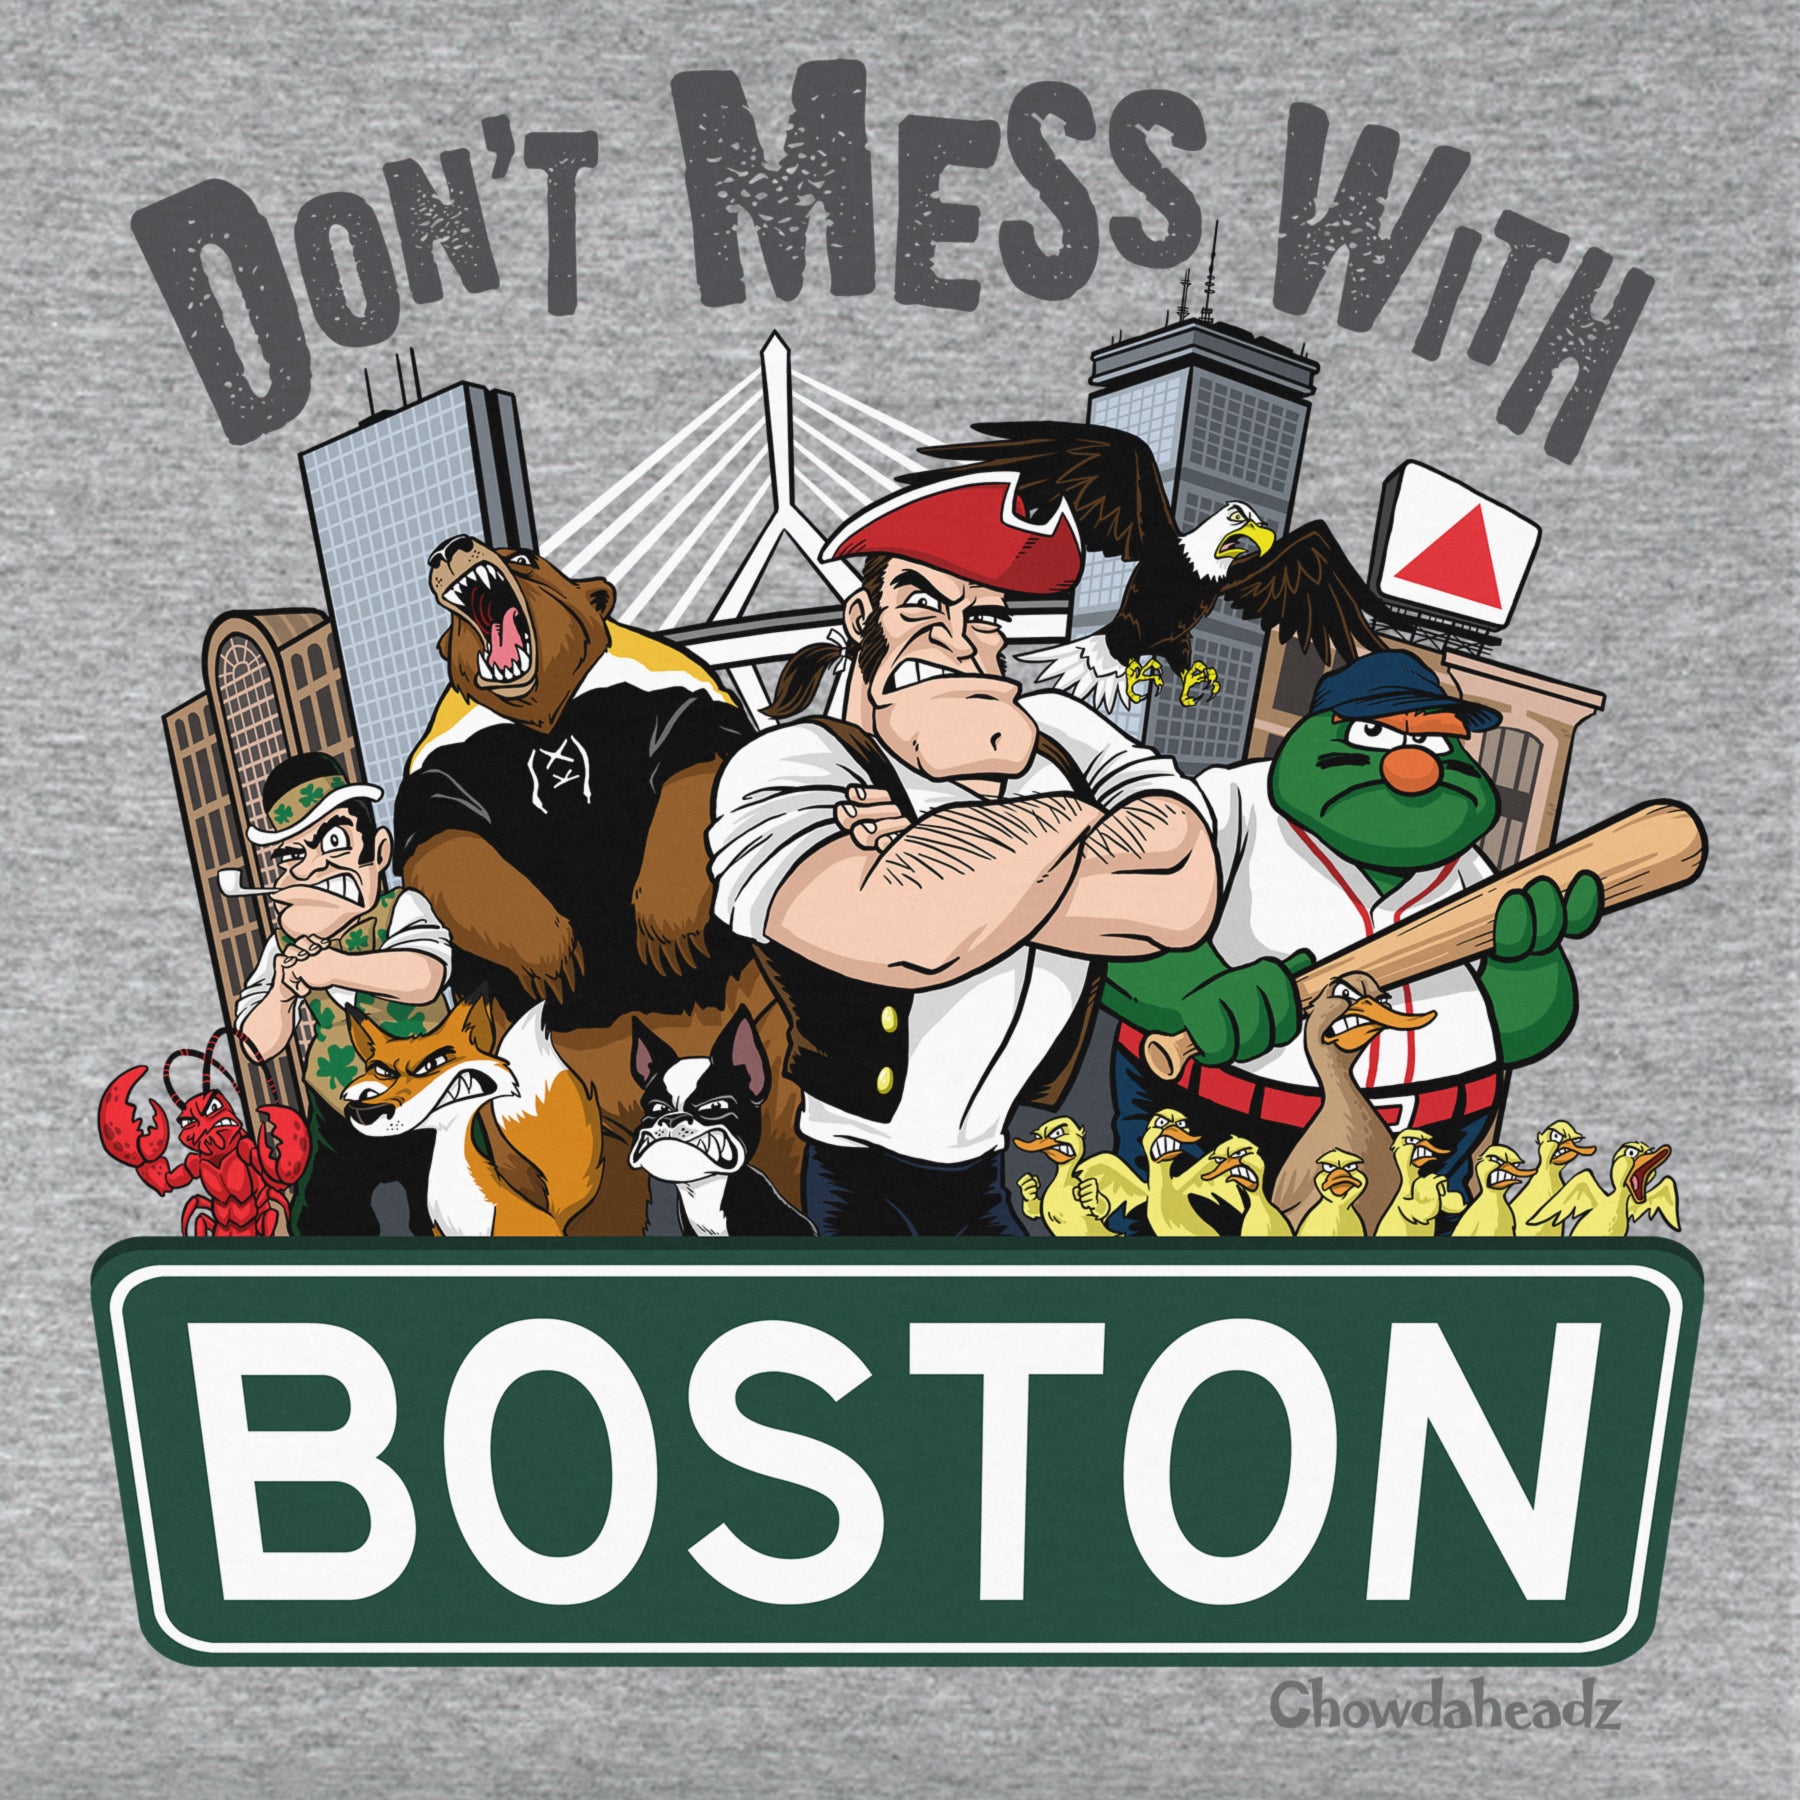 Don't Mess With Boston Youth T-Shirt - Chowdaheadz